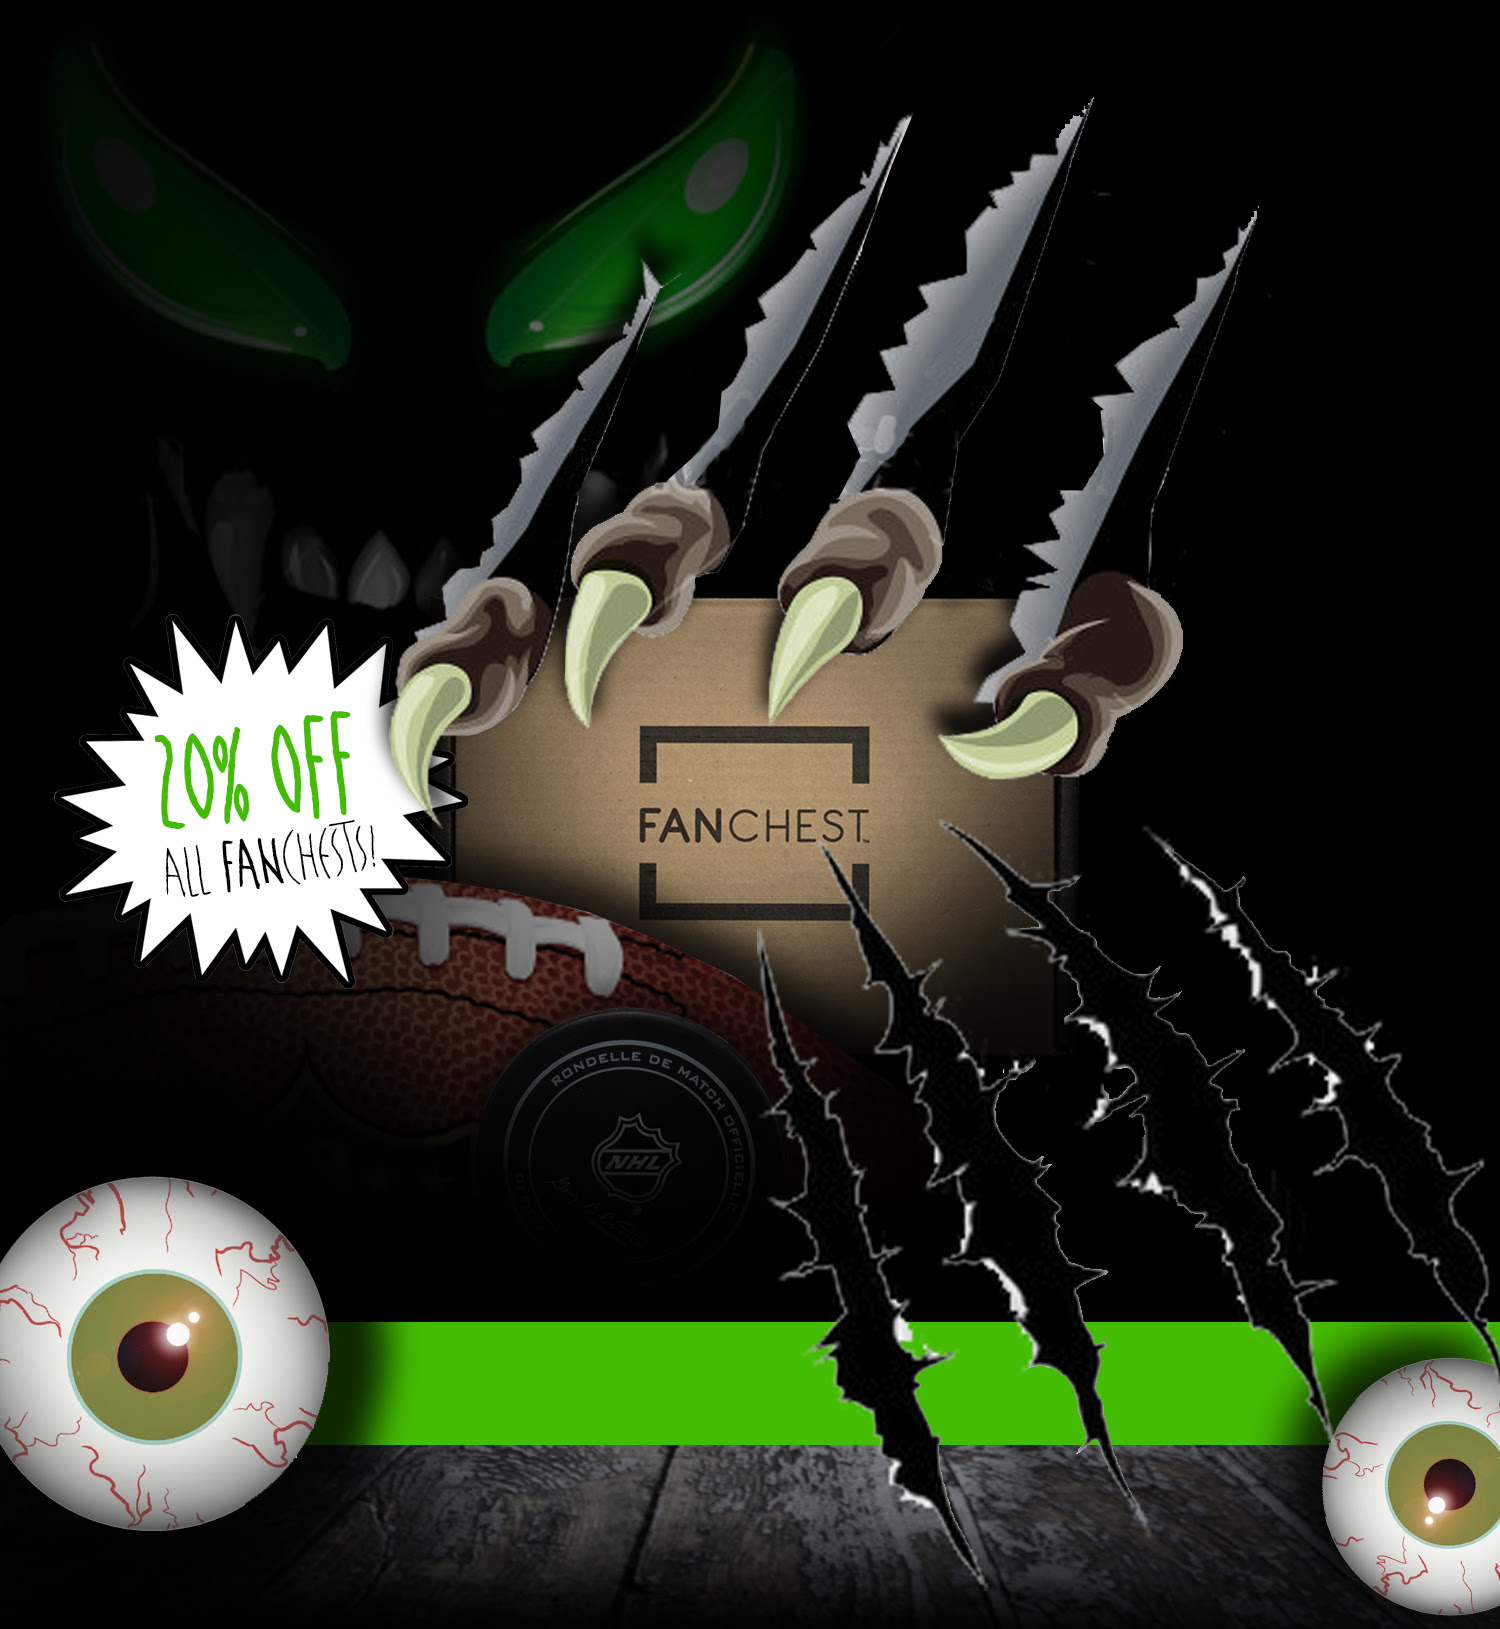 2 Days Only! Fanchest Halloween Sale – 20% off all Franchises!